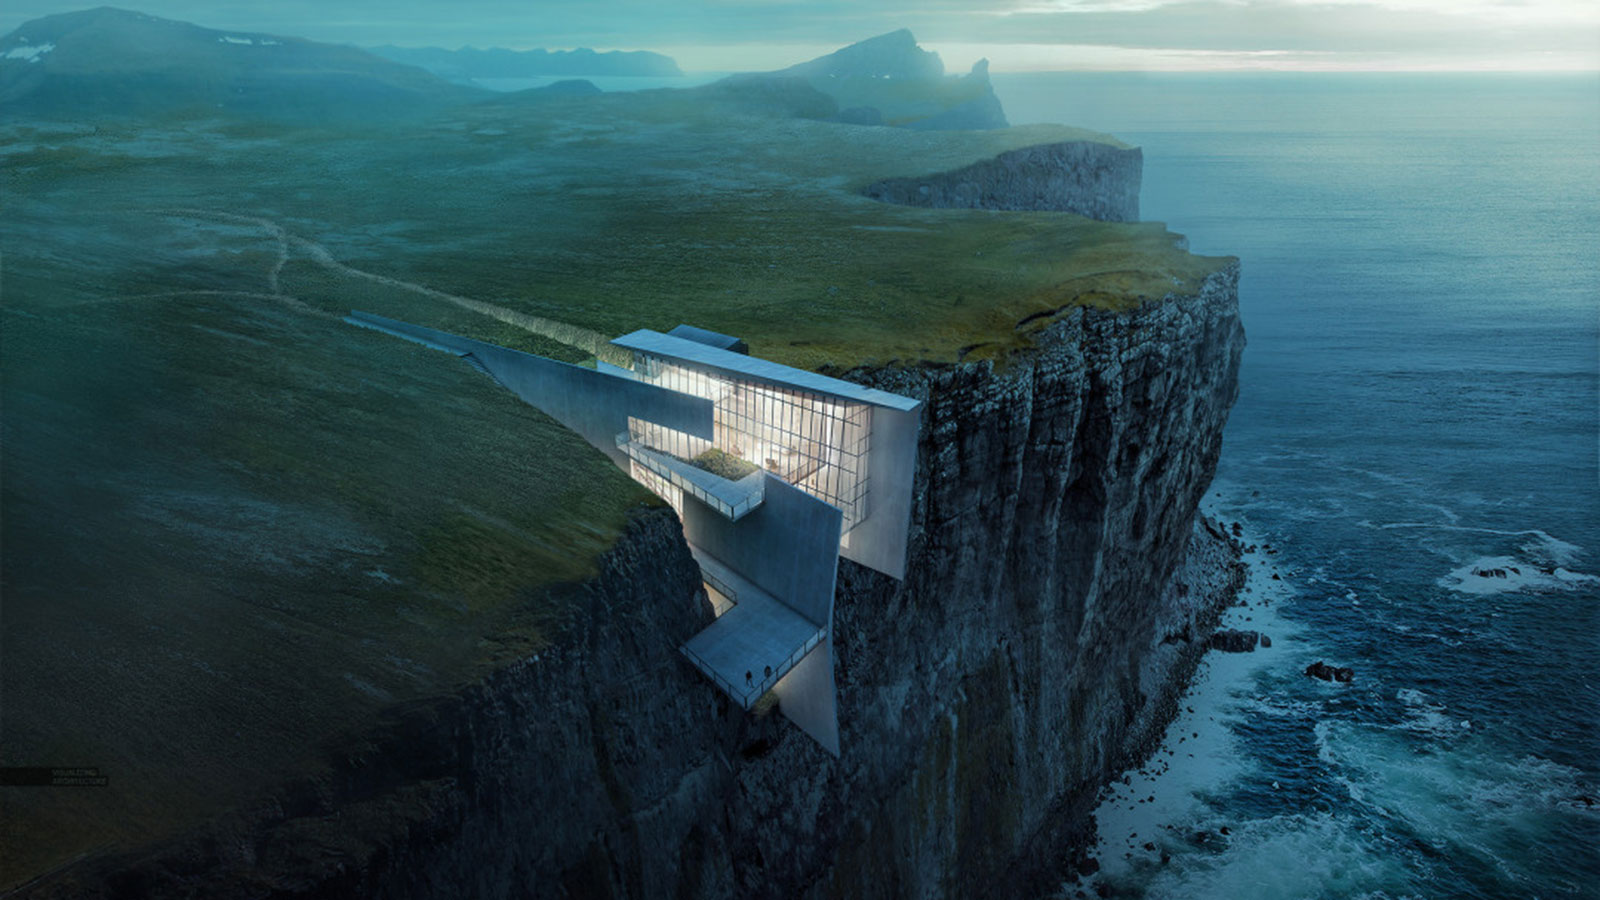 ICELAND CLIFFSIDE RETREAT | Muted